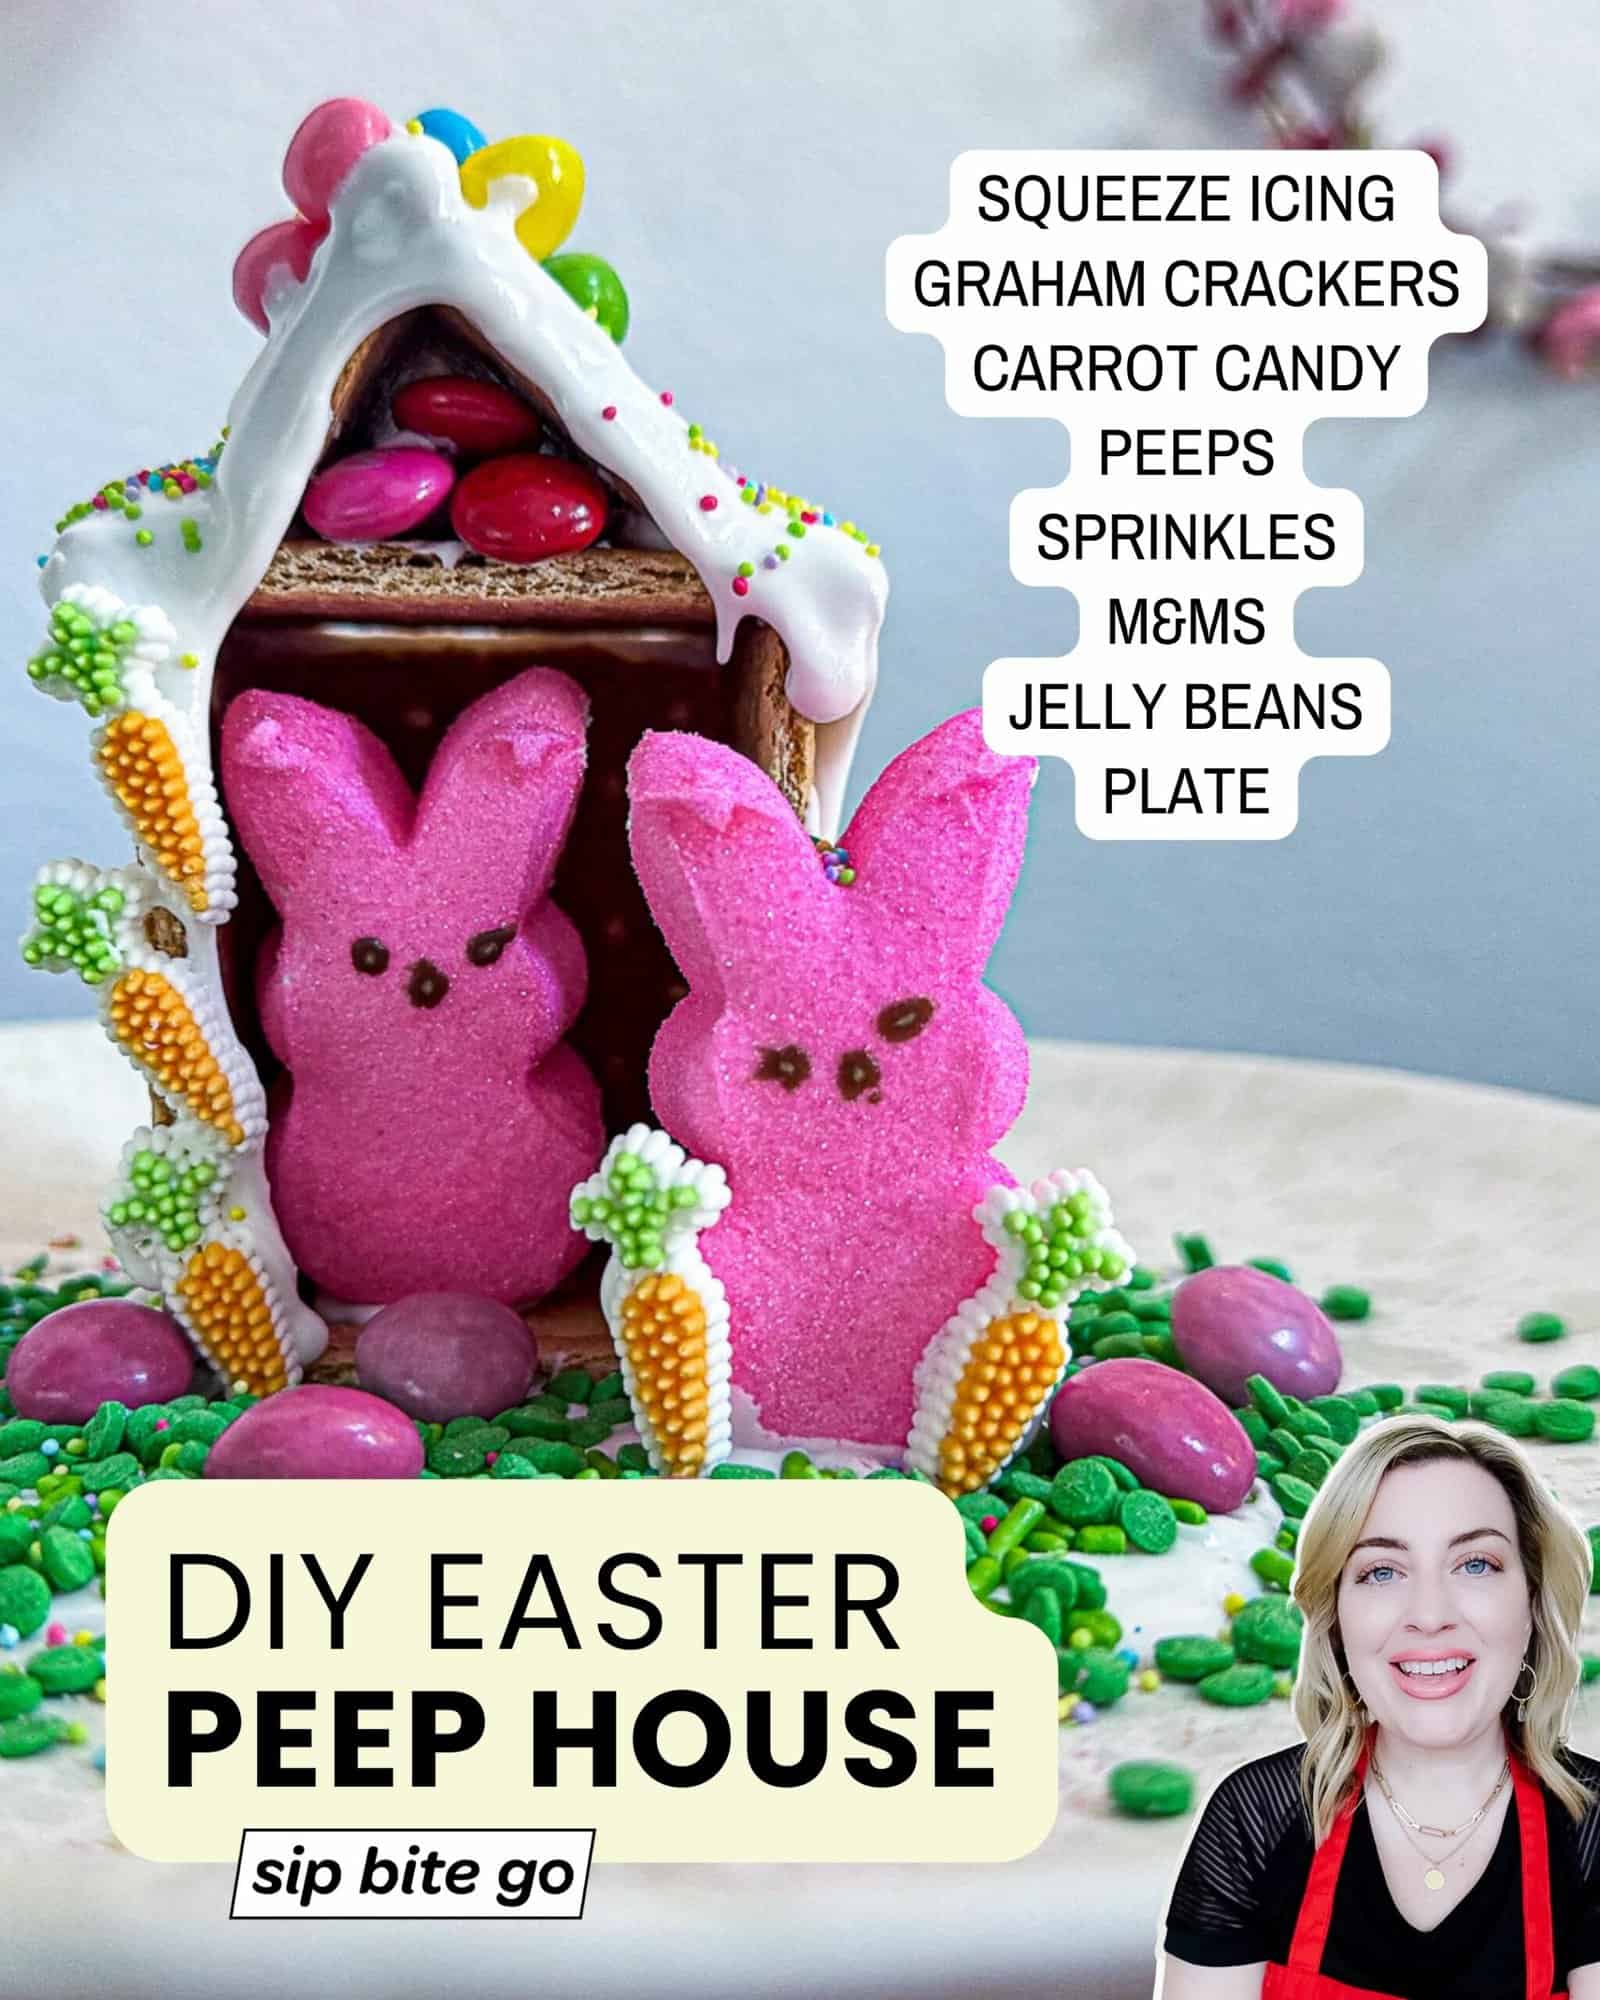 Supplies for making a graham cracker peep house Easter craft